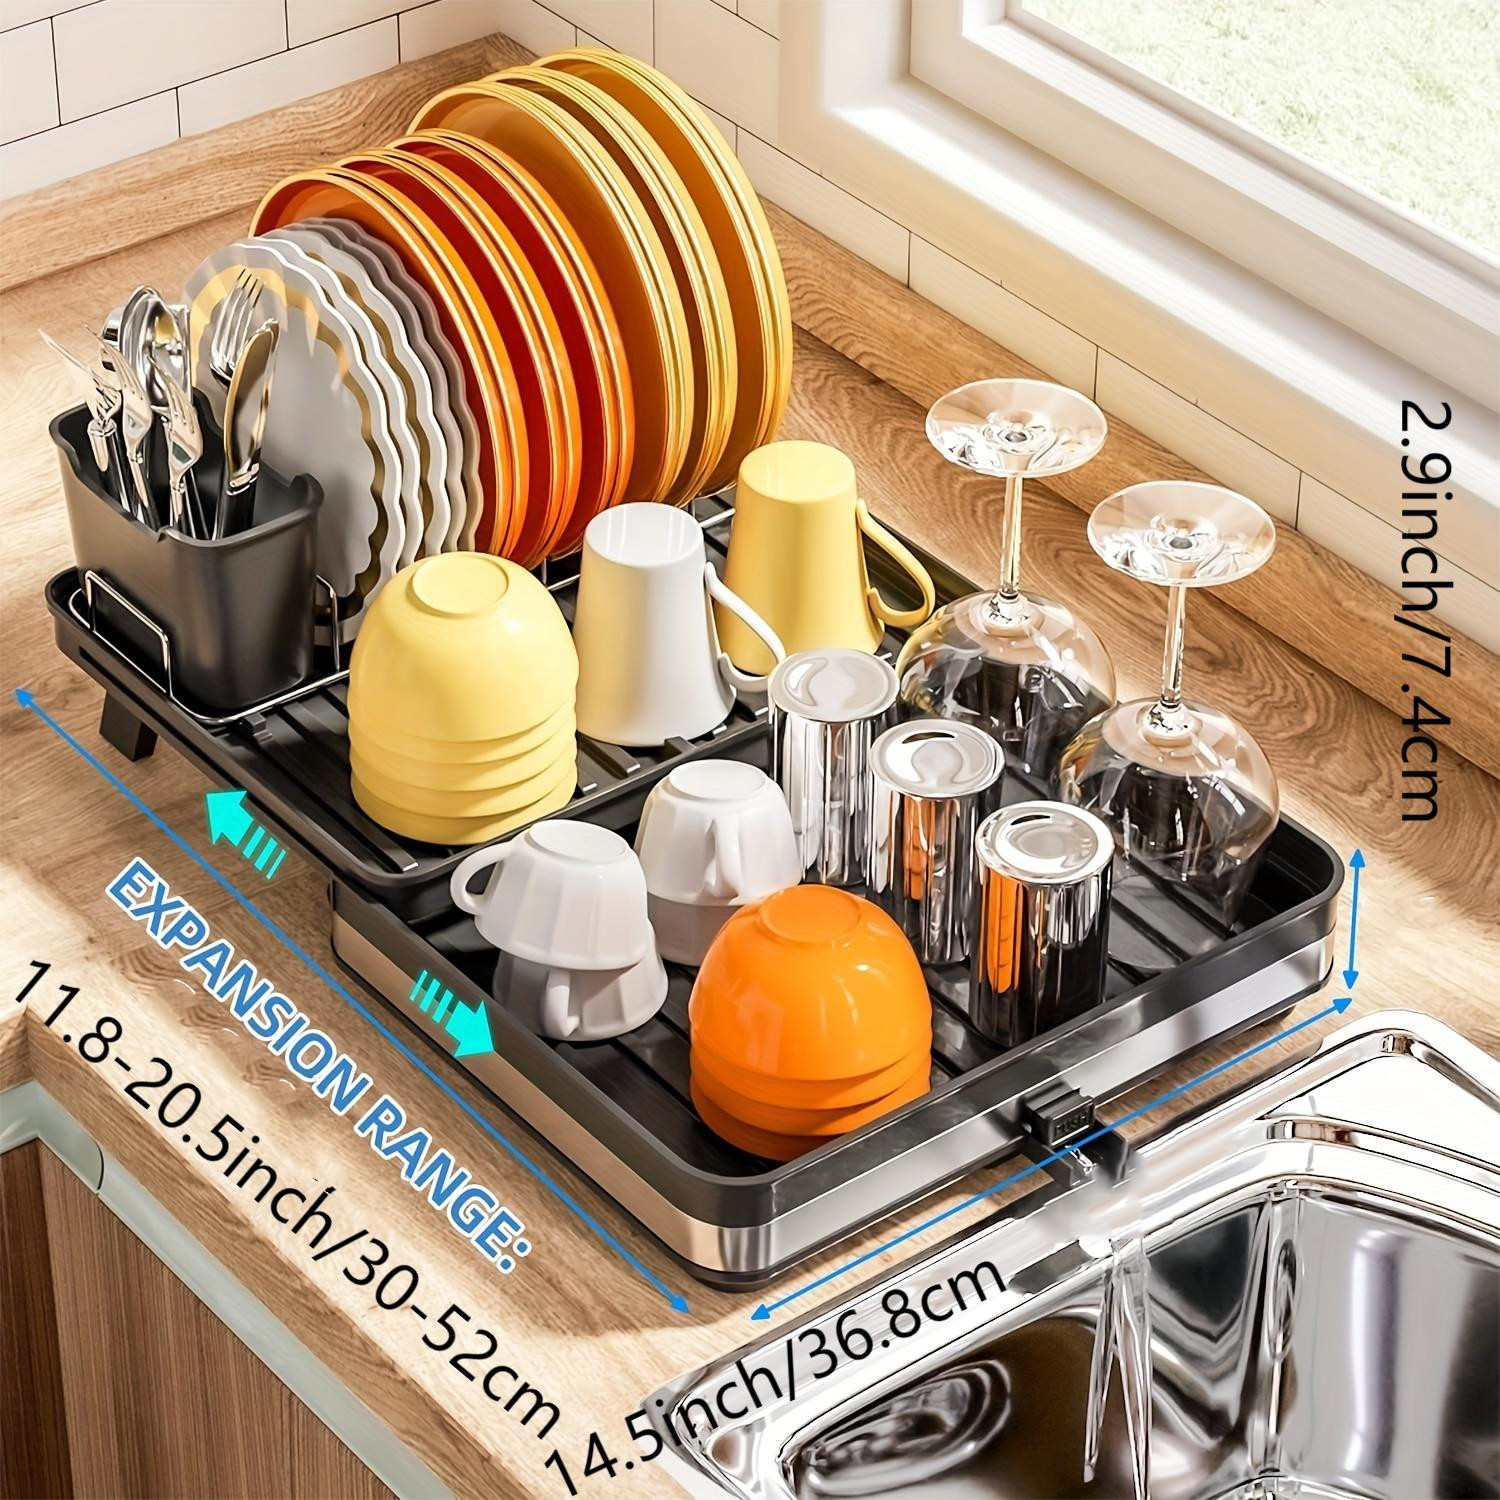 Designs for Small Kitchens: Dish Racks  Sink dish rack, Small kitchen sink,  Sink dish drainer